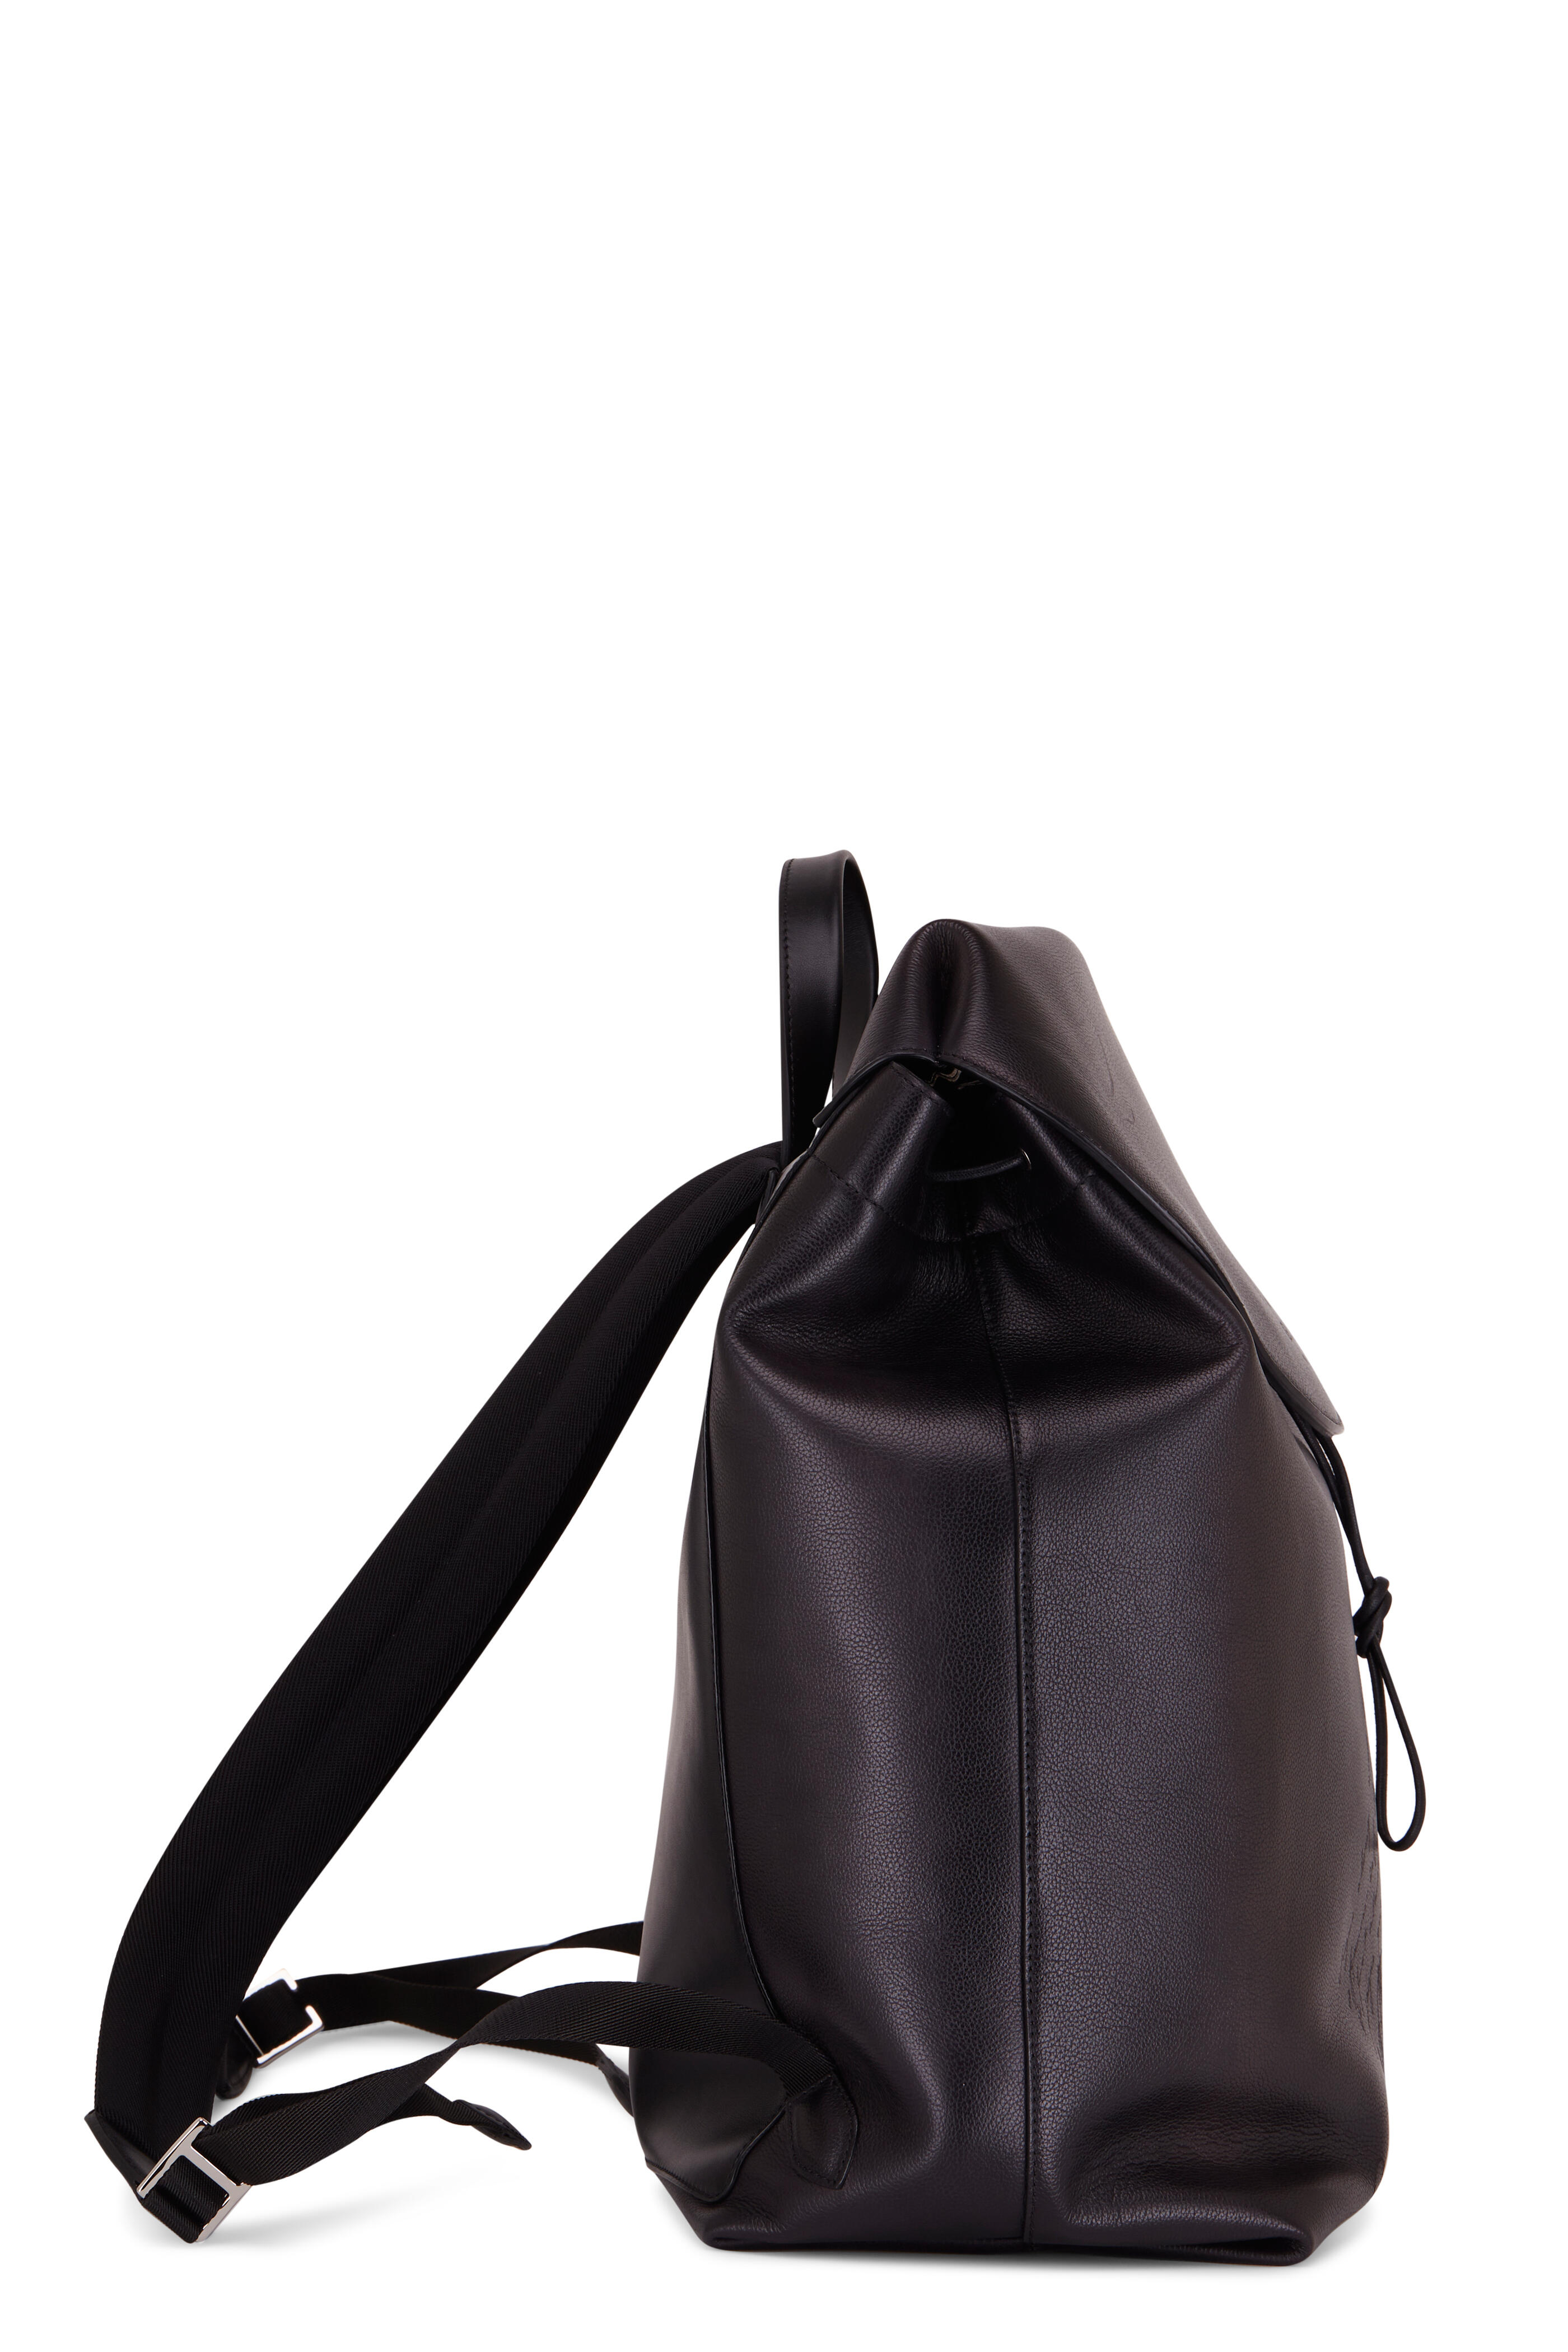 Berluti - Late Hour Black Leather Backpack | Mitchell Stores